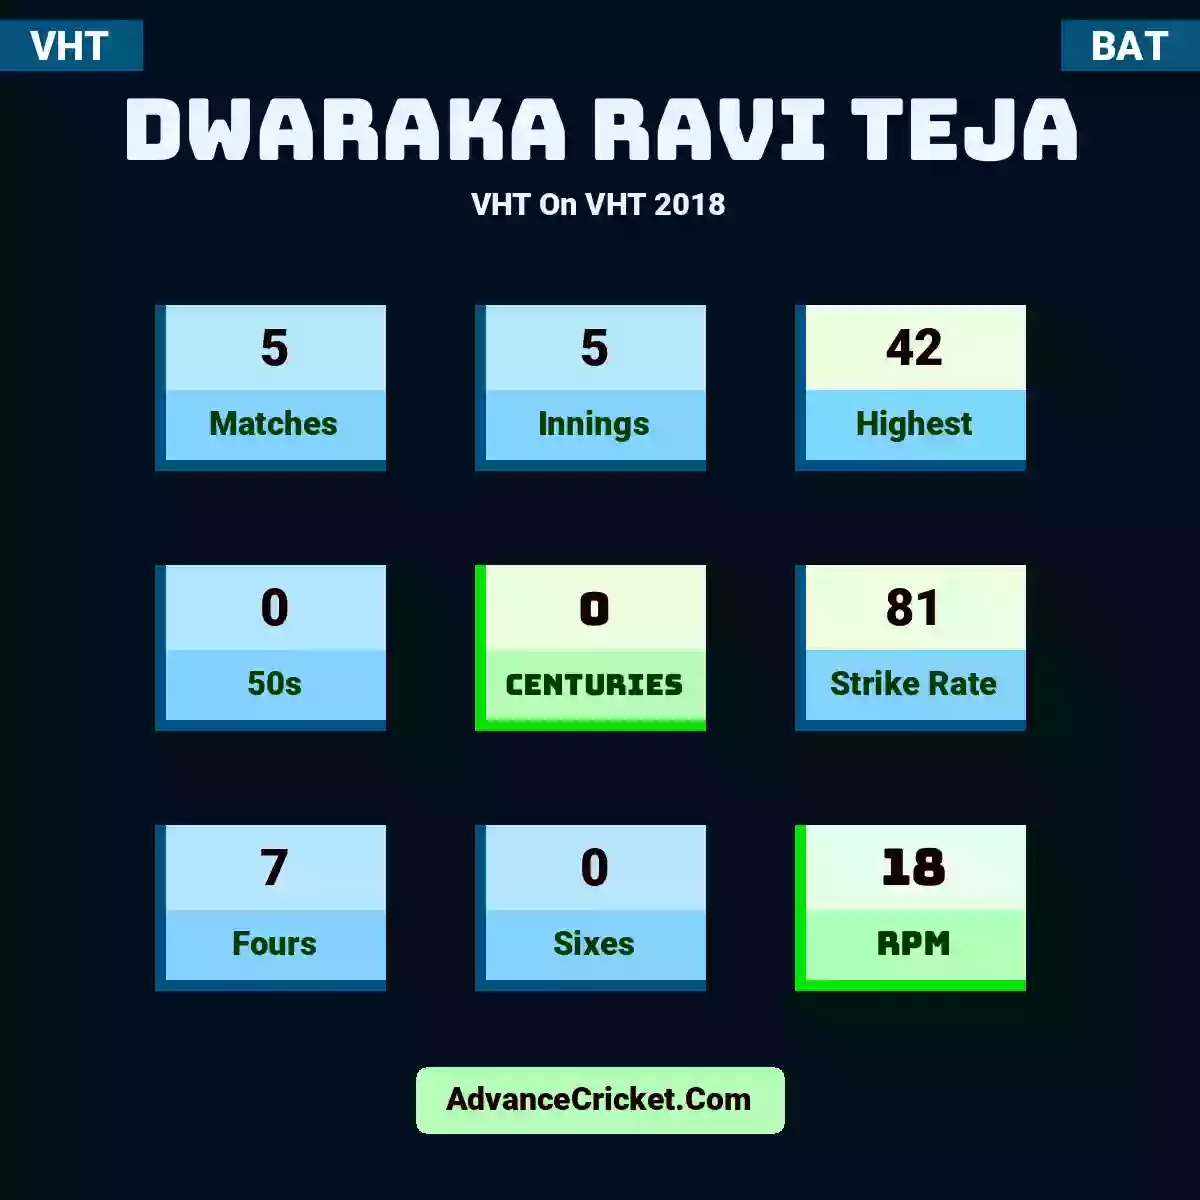 Dwaraka Ravi Teja VHT  On VHT 2018, Dwaraka Ravi Teja played 5 matches, scored 42 runs as highest, 0 half-centuries, and 0 centuries, with a strike rate of 81. D.Teja hit 7 fours and 0 sixes, with an RPM of 18.